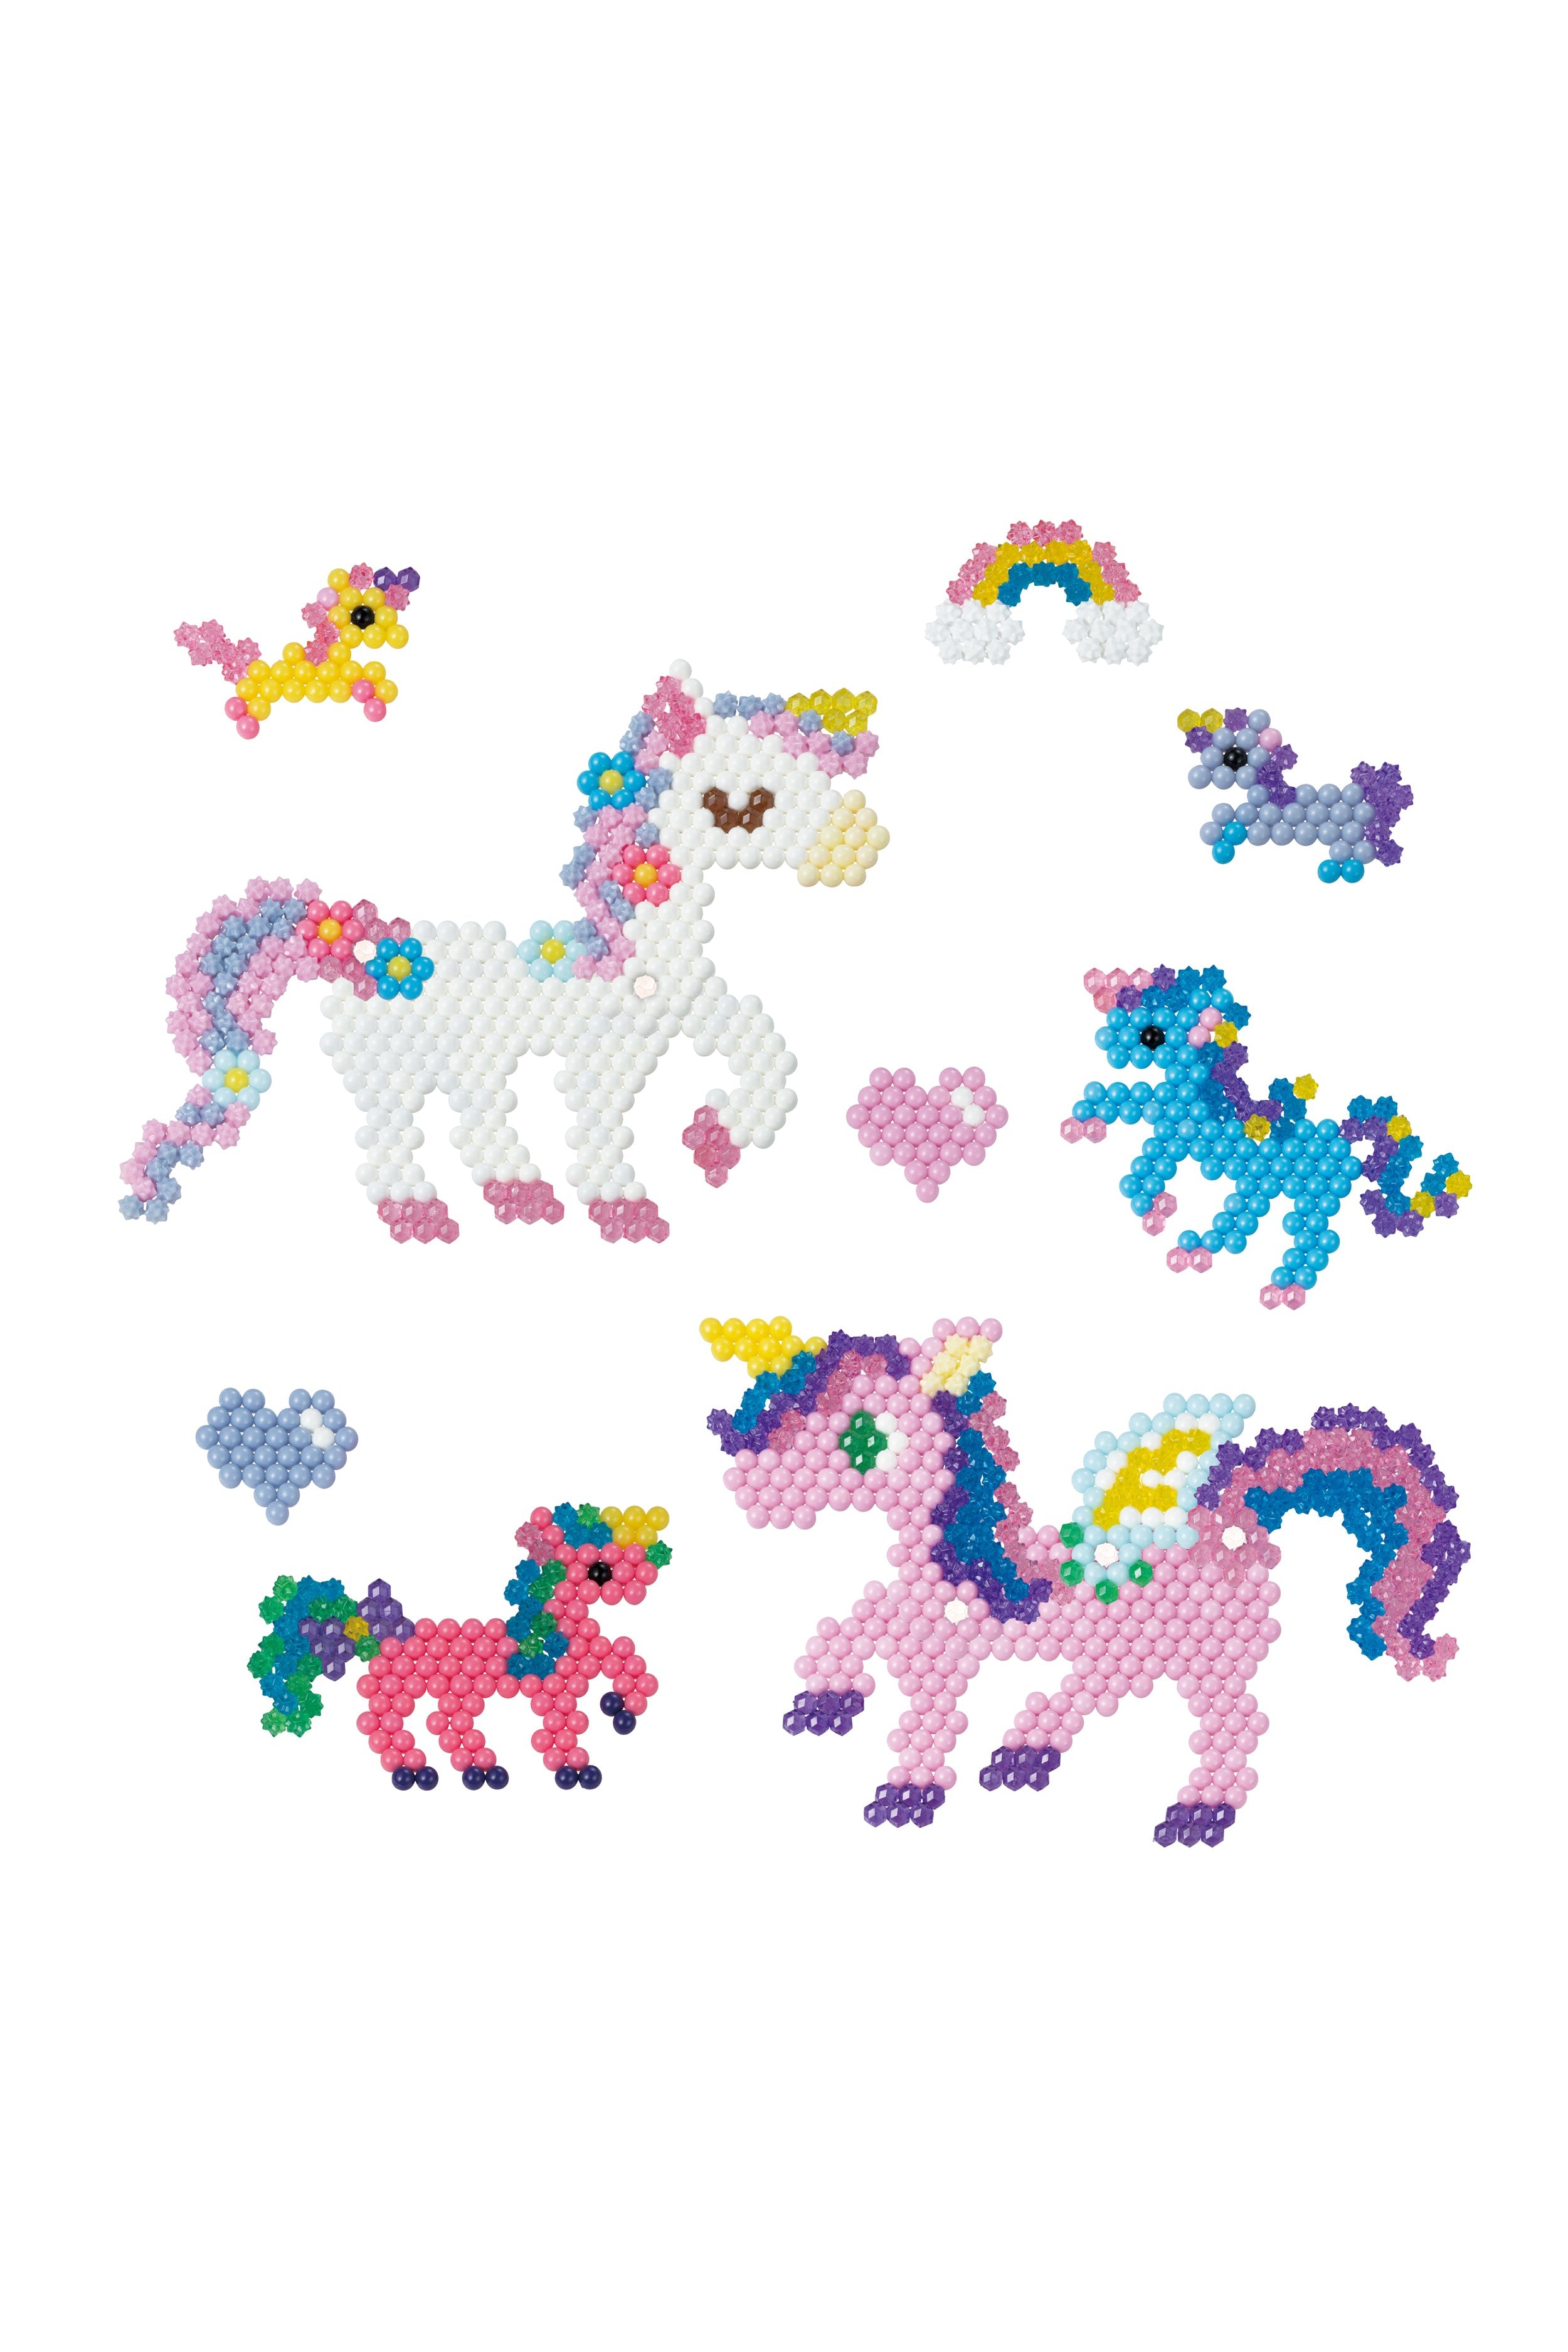 Look at our Aquabeads unicorn we've just made can you make any